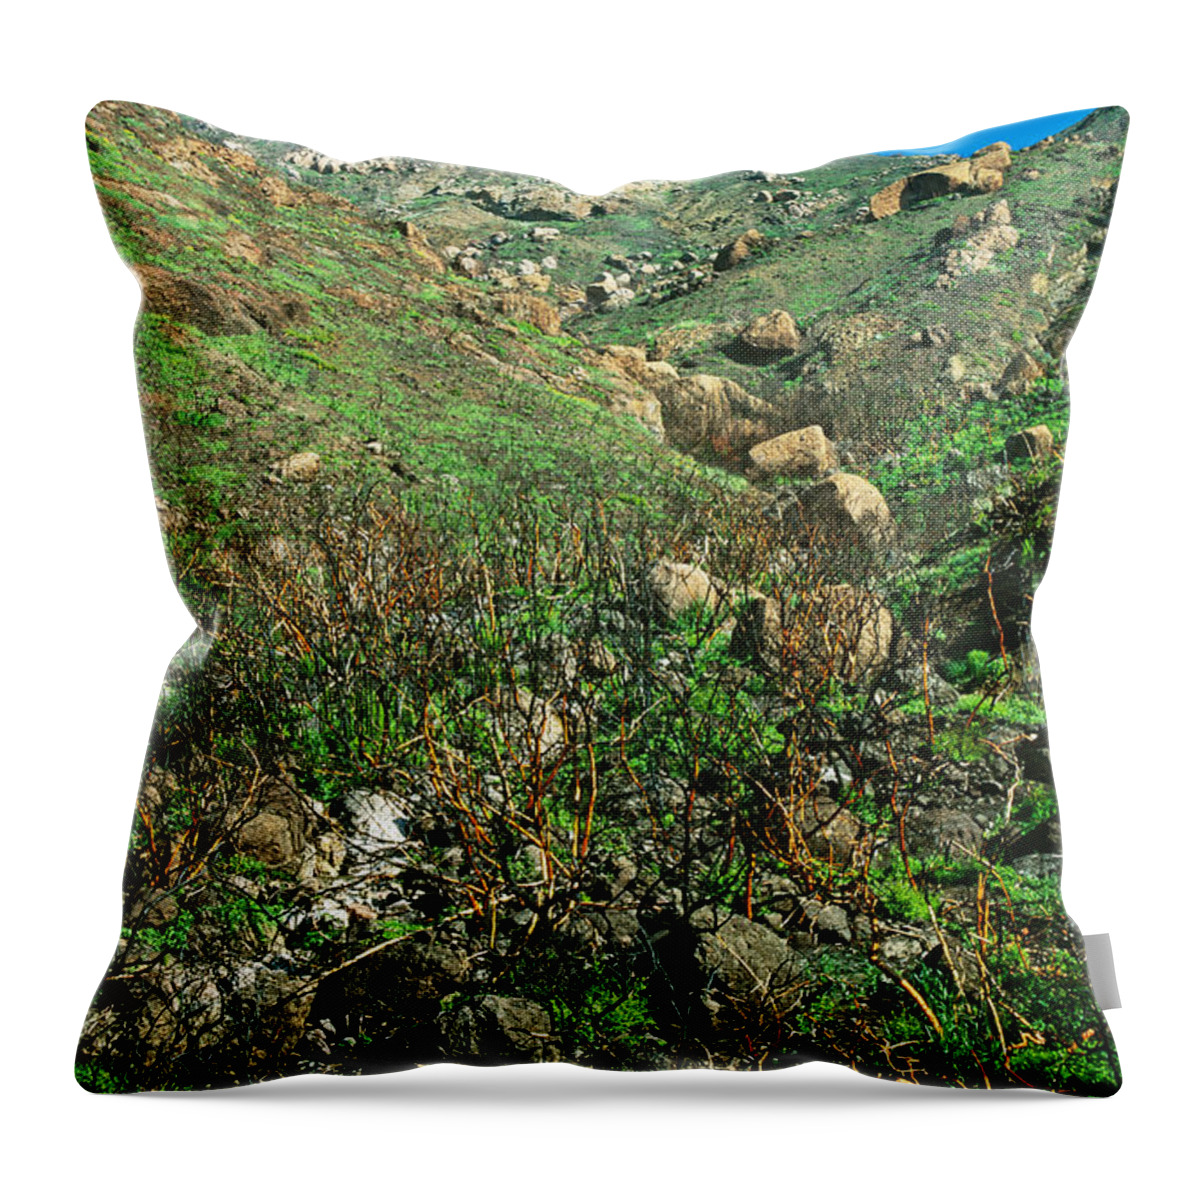 Adaptation Throw Pillow featuring the photograph Regrowth After Fire by Richard Hansen